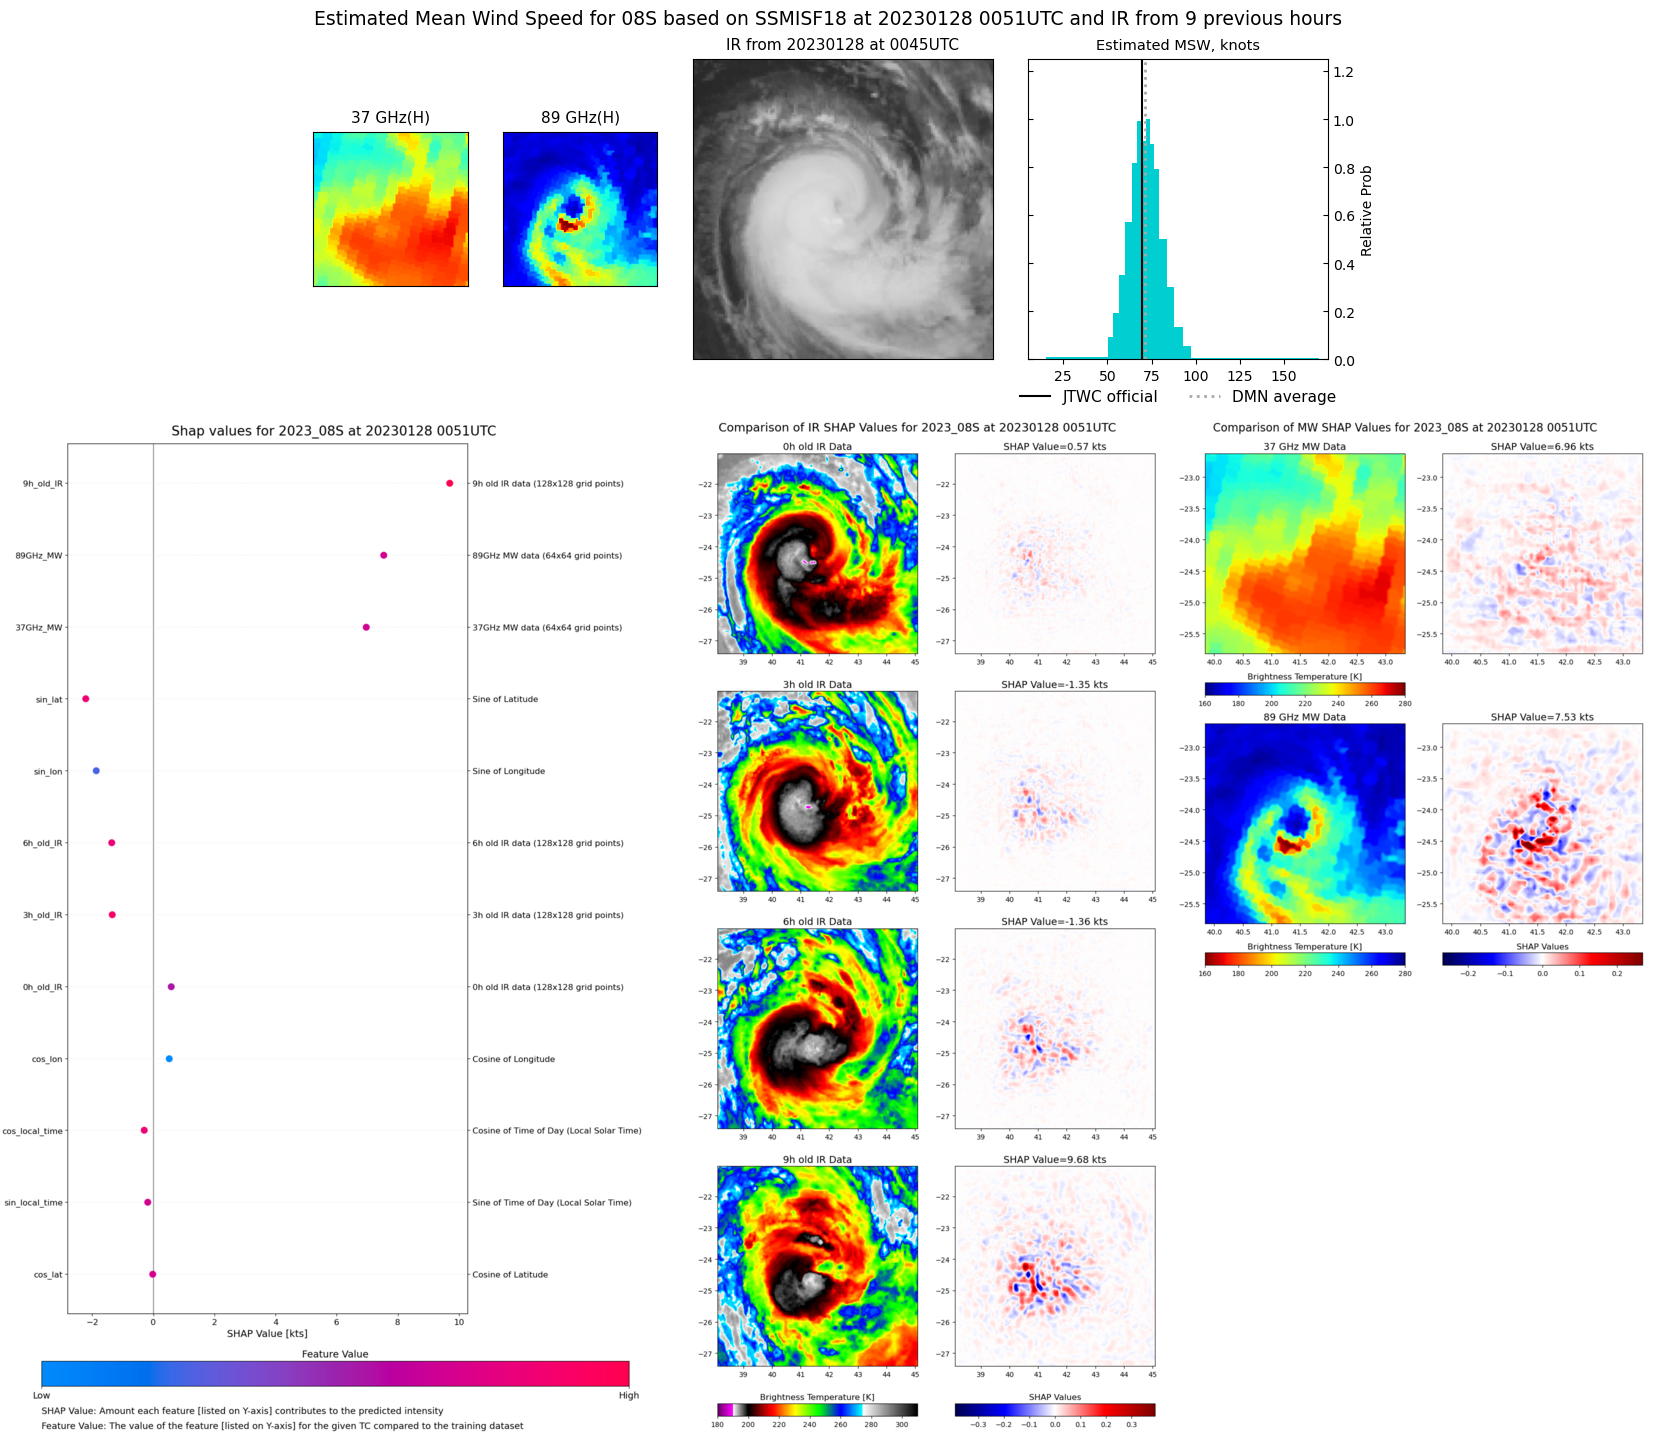 SATELLITE ANALYSIS, INITIAL POSITION AND INTENSITY DISCUSSION: TC 08S HAS INTENSIFIED OVER THE PREVIOUS 12 HOURS AS THE SYSTEM CONTINUES TO TRANSIT GENERALLY SOUTHWARD INTO A FAVORABLE ENVIRONMENT. ANIMATED ENHANCED INFRARED (EIR) SATELLITE IMAGERY INDICATES THAT THE SYSTEM HAS BECOME BETTER ORGANIZED WITH DEEP CONVECTIVE TOWERS FIRING ON THE WESTERN SIDE, WHILE VIGOROUS CONVECTION IS DEVELOPING OVER THE NORTHERN QUADRANT OBSCURING THE LOW LEVEL CIRCULATION CENTER (LLCC). A 272231Z AMSR2 36GHZ MICROWAVE IMAGE SHOWS A WELL-DEFINED LOW-LEVEL EYE FEATURE. THE INITIAL POSITION IS PLACED WITH HIGH CONFIDENCE BASED ON THE LOW-LEVEL MICROWAVE EYE IN THE AMSR2 IMAGE AND CLOSE TO AGENCY POSITION FIXES. THE INITIAL INTENSITY IS ASSESSED WITH MEDIUM CONFIDENCE BASED ON A COMBINATION OF SUBJECTIVE AND OBJECTIVE INTENSITY ESTIMATES, HEDGED TOWARDS OBJECTIVE INTENSITY ESTIMATES FROM SATCON, ADT AND AIDT WHICH APPEAR TO BE MORE REPRESENTATIVE. ENVIRONMENTAL CONDITIONS CONTINUE TO BE GENERALLY FAVORABLE, WITH WARM SEA SURFACE TEMPERATURES (28-29C), MODERATE (10-15 KNOTS) VWS, AND STRONG POLEWARD OUTFLOW.